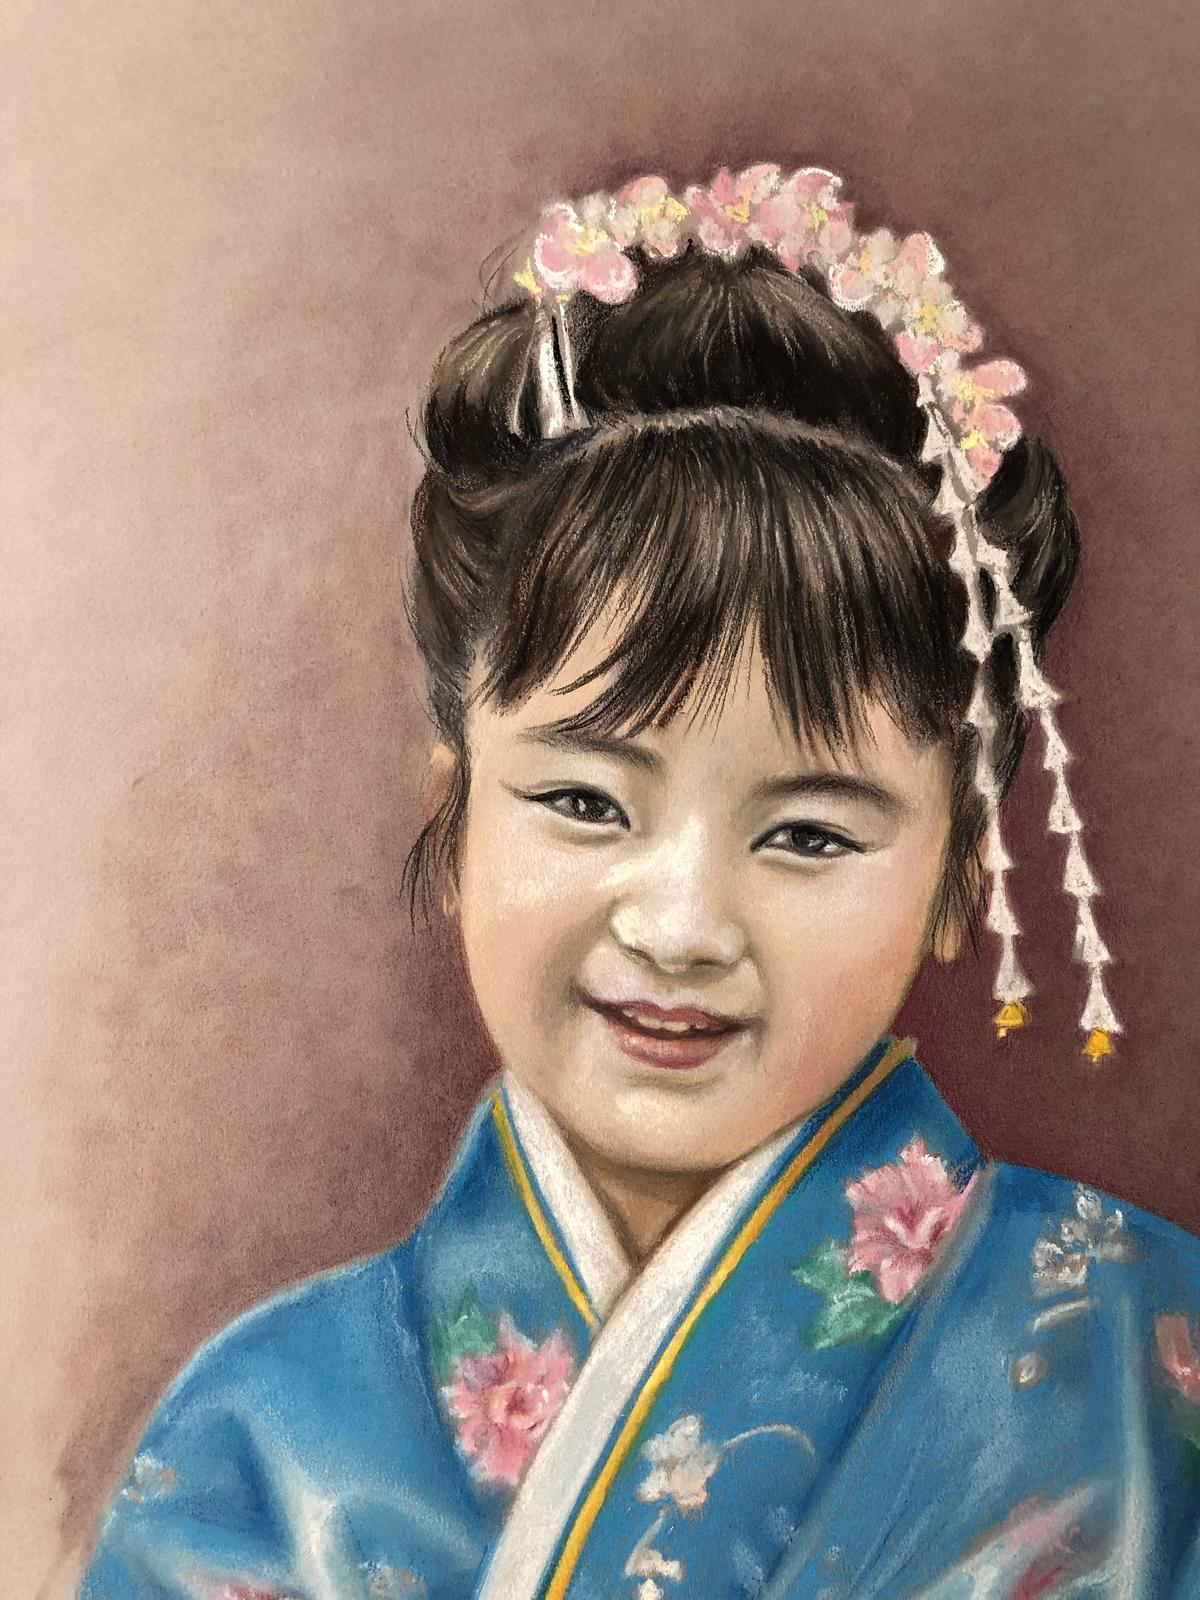 Japanese girl in traditional costume, by Barbara Schafer. Pastel. (Courtesy of Barbara Schafer)